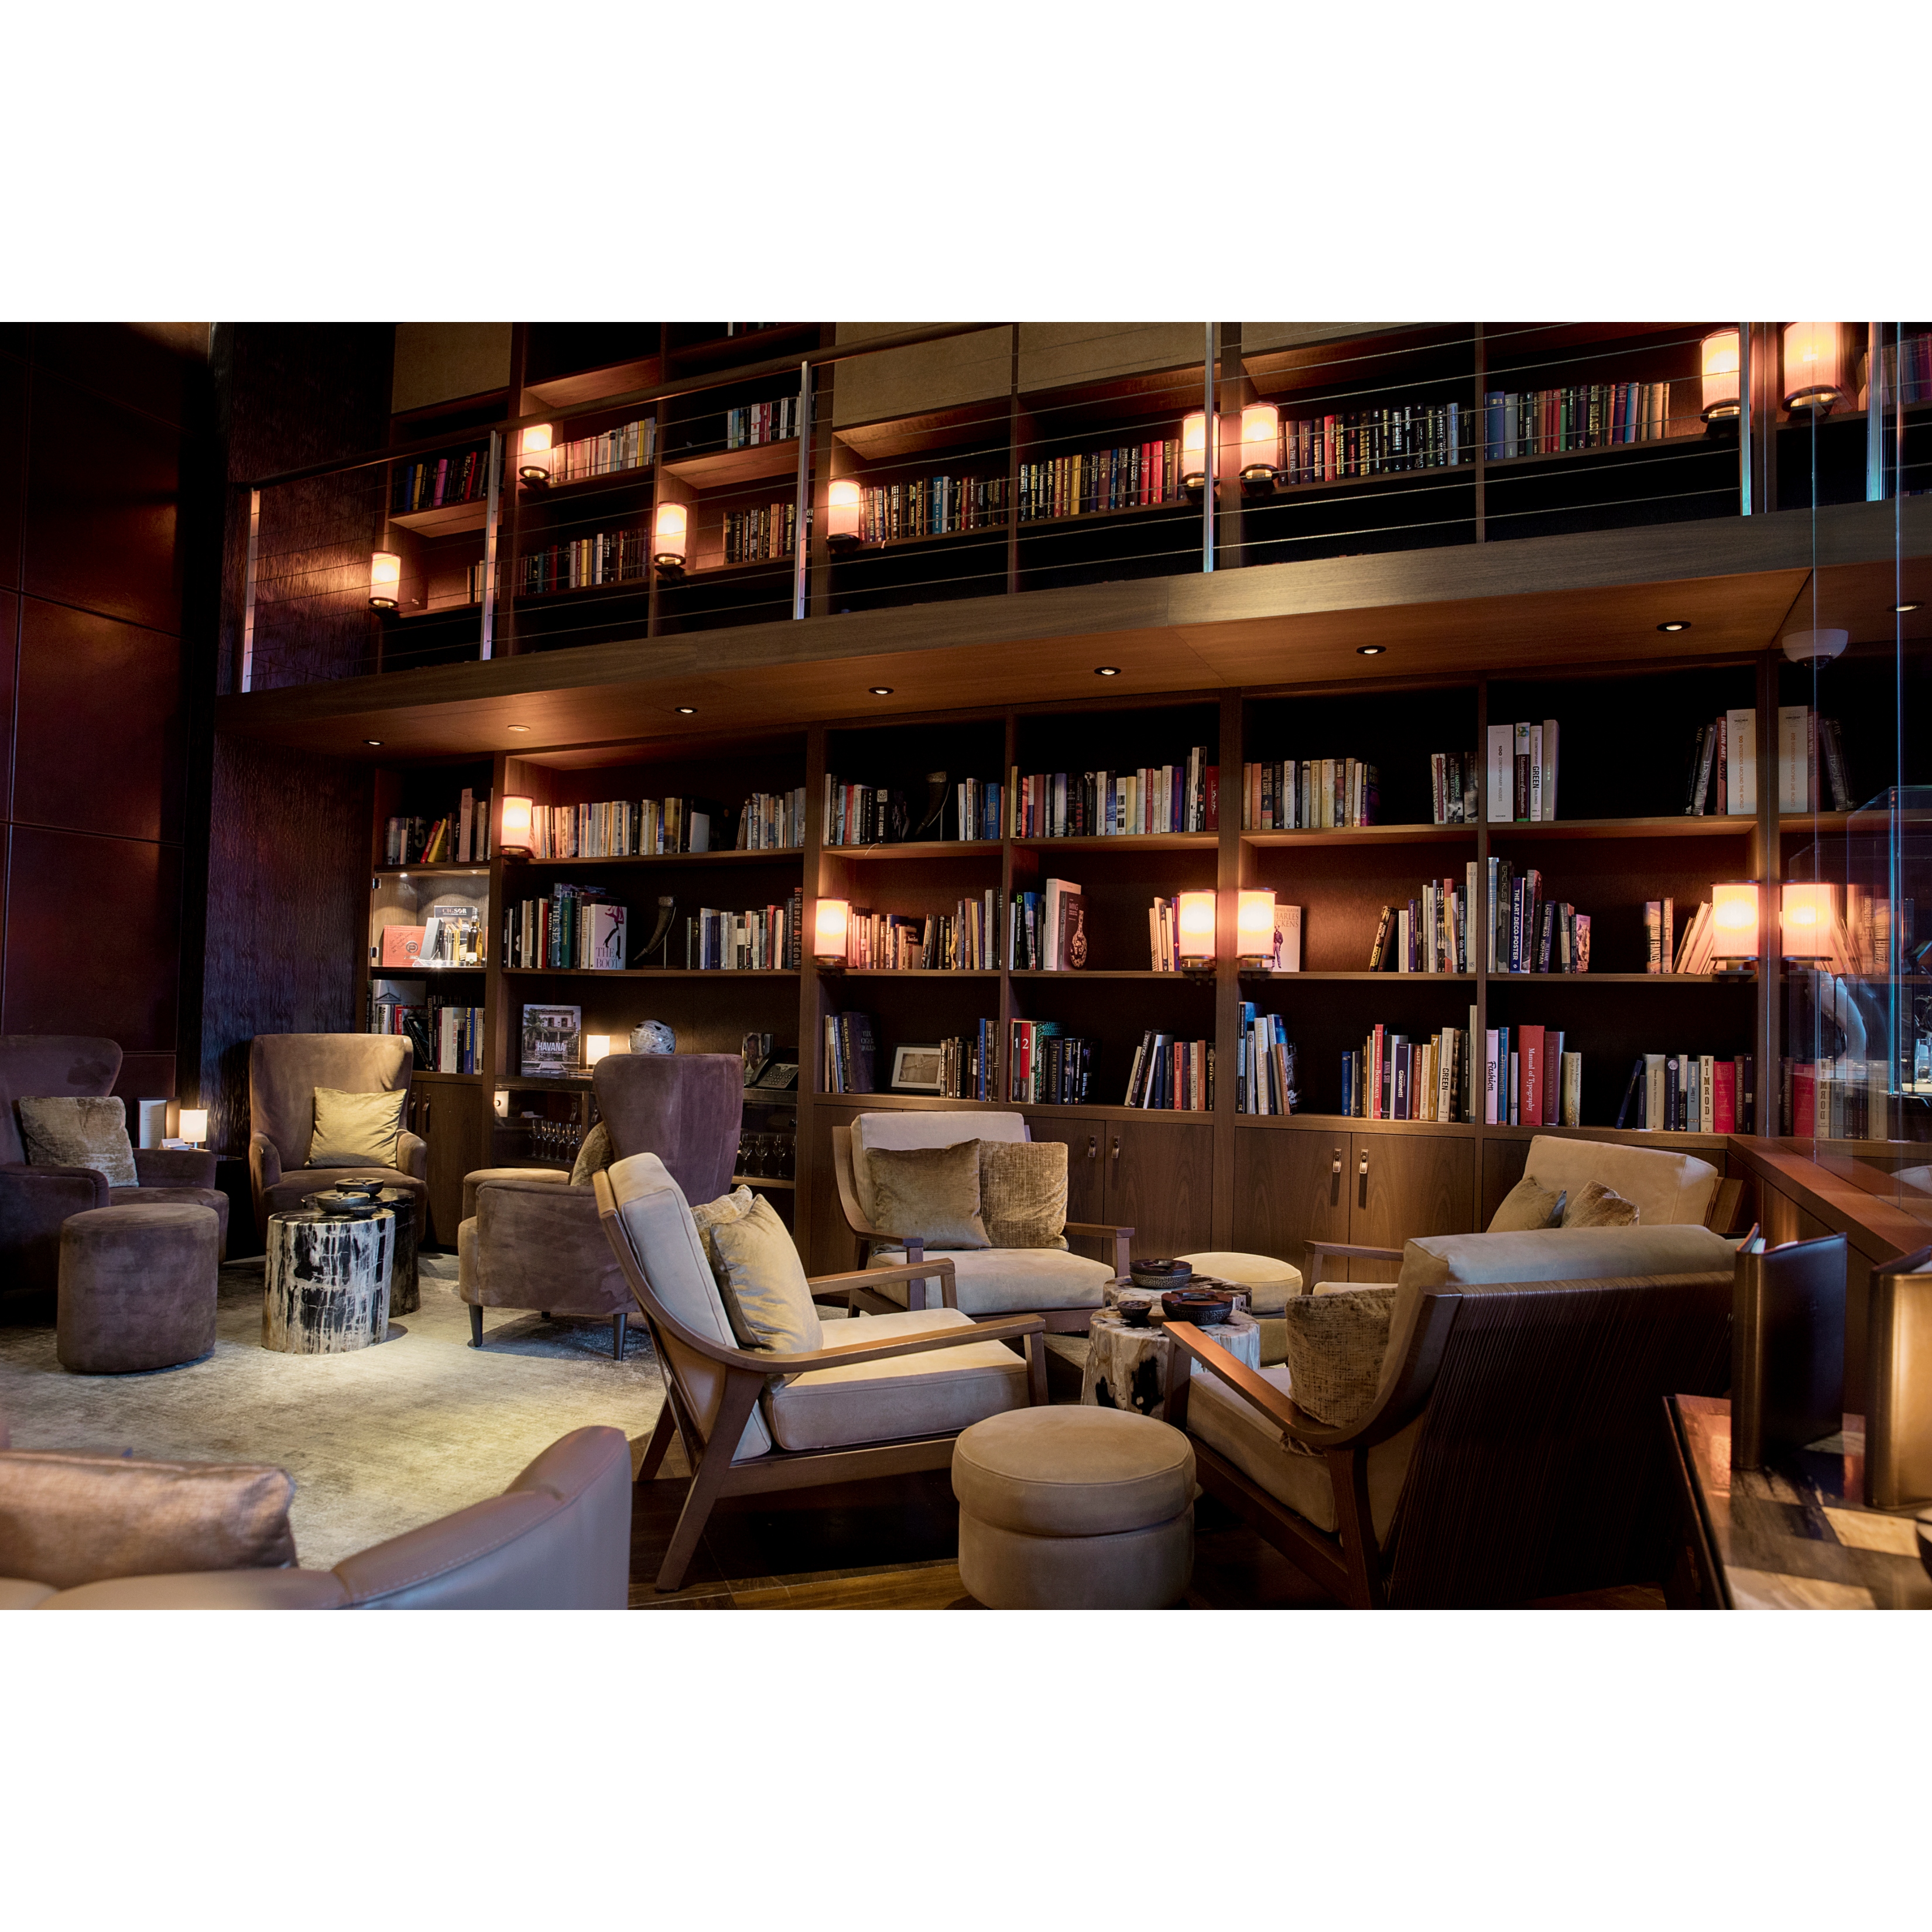 the cigar library seating area at chedi andermatt swiss alps hotel